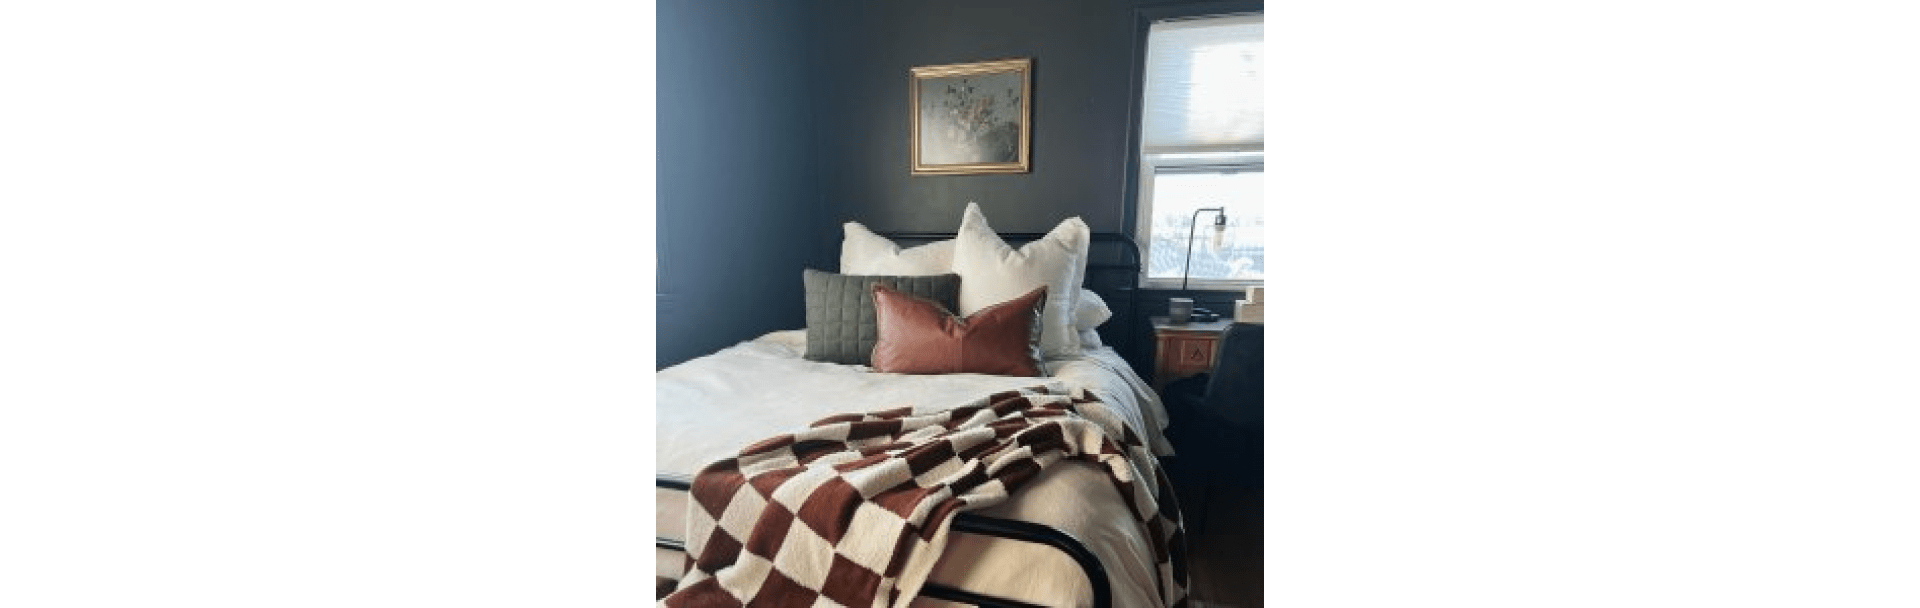 Rustic bedroom painted SW 6244 Naval, Sherwin Williams 2020 color of the year.